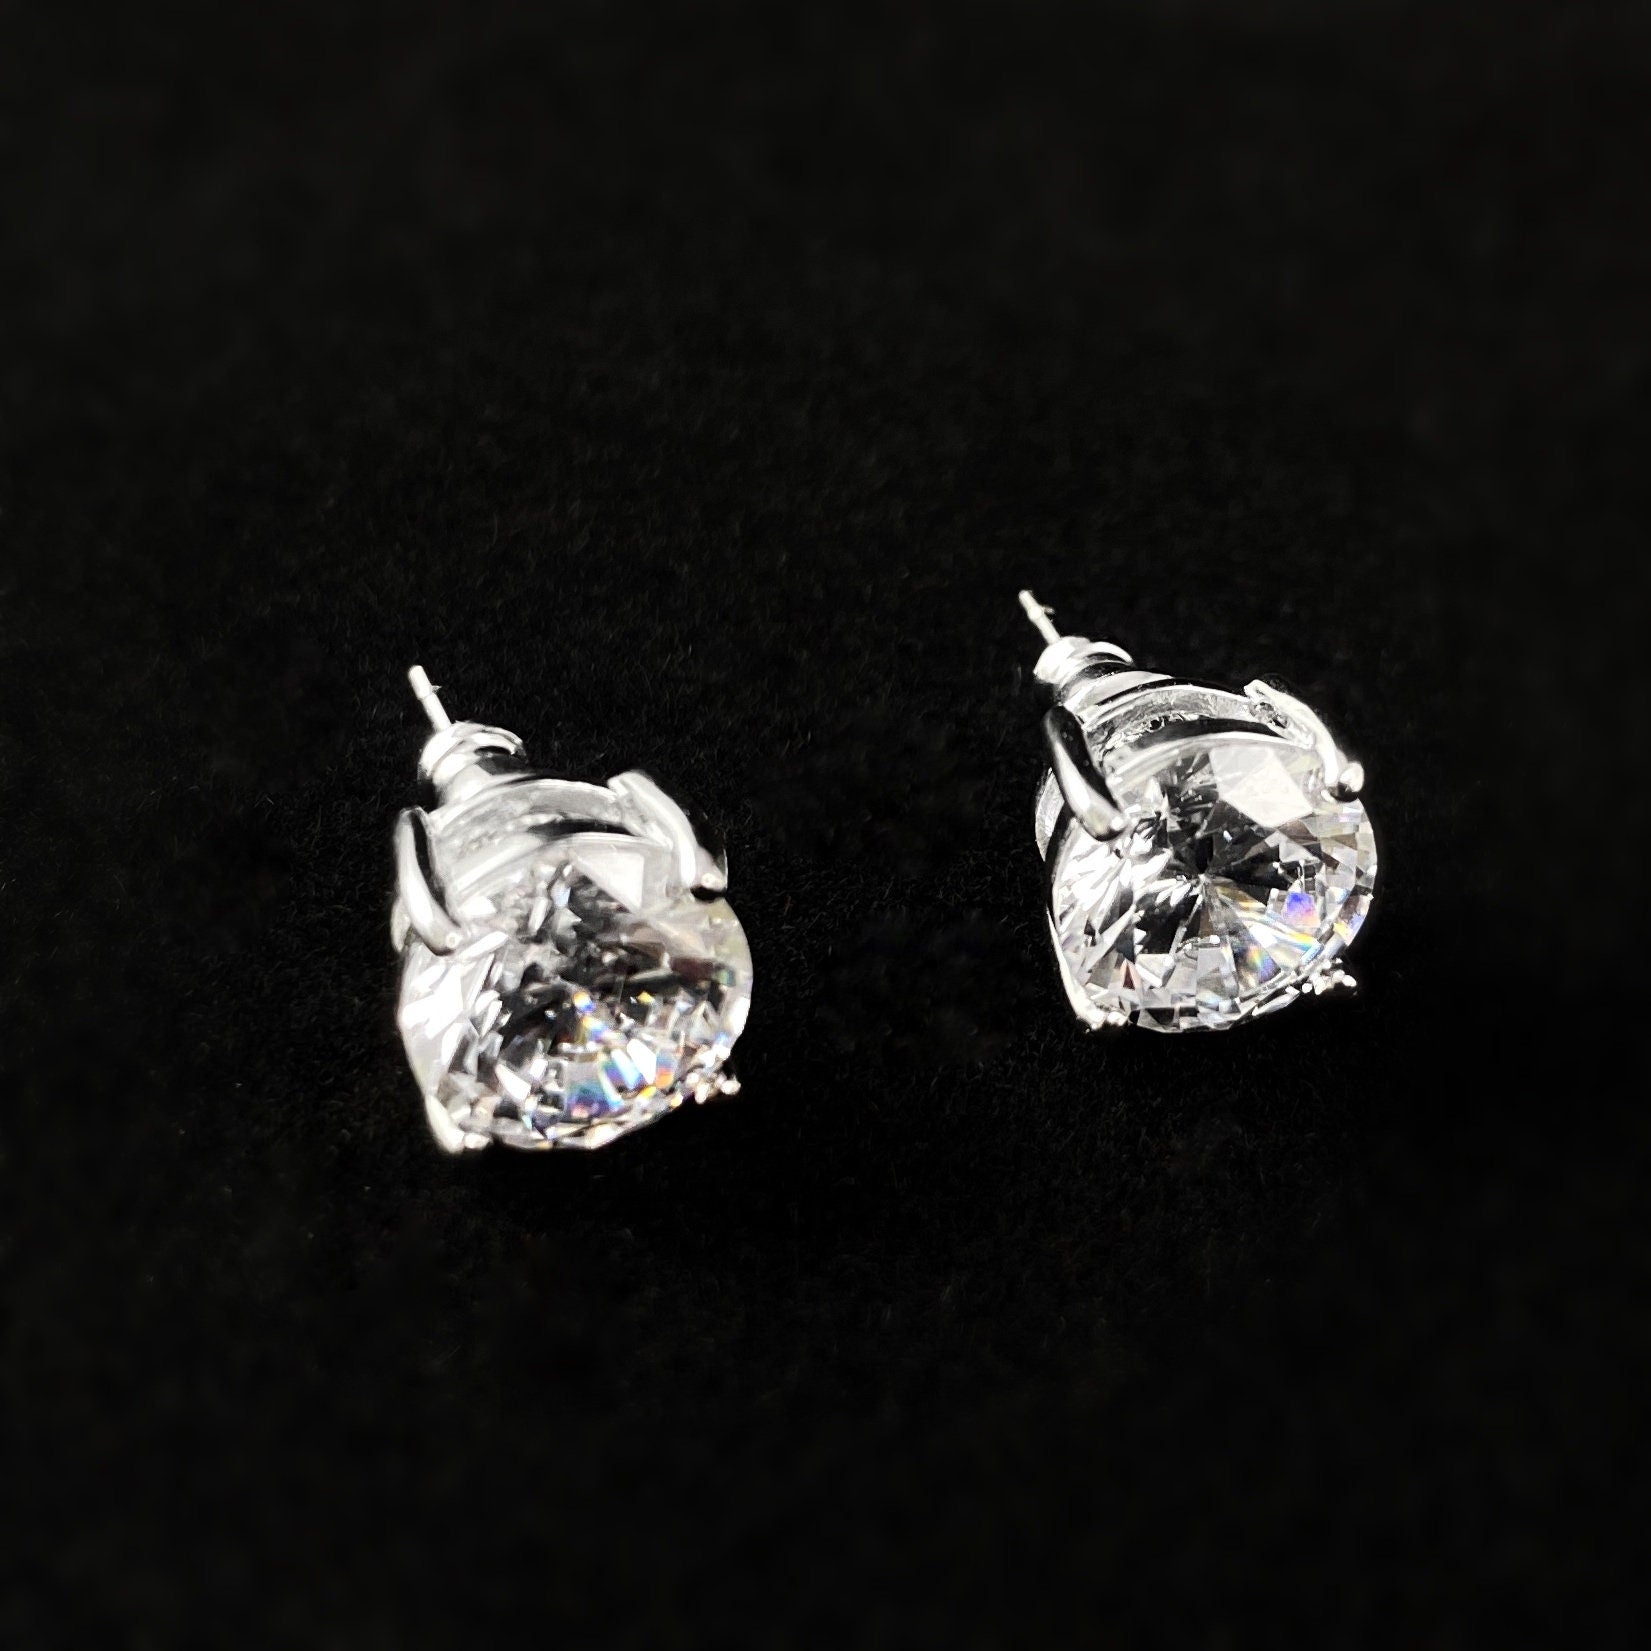 925 Sterling Silver and CZ Stone Glamorous Stud Earrings  - Elle Jewelry